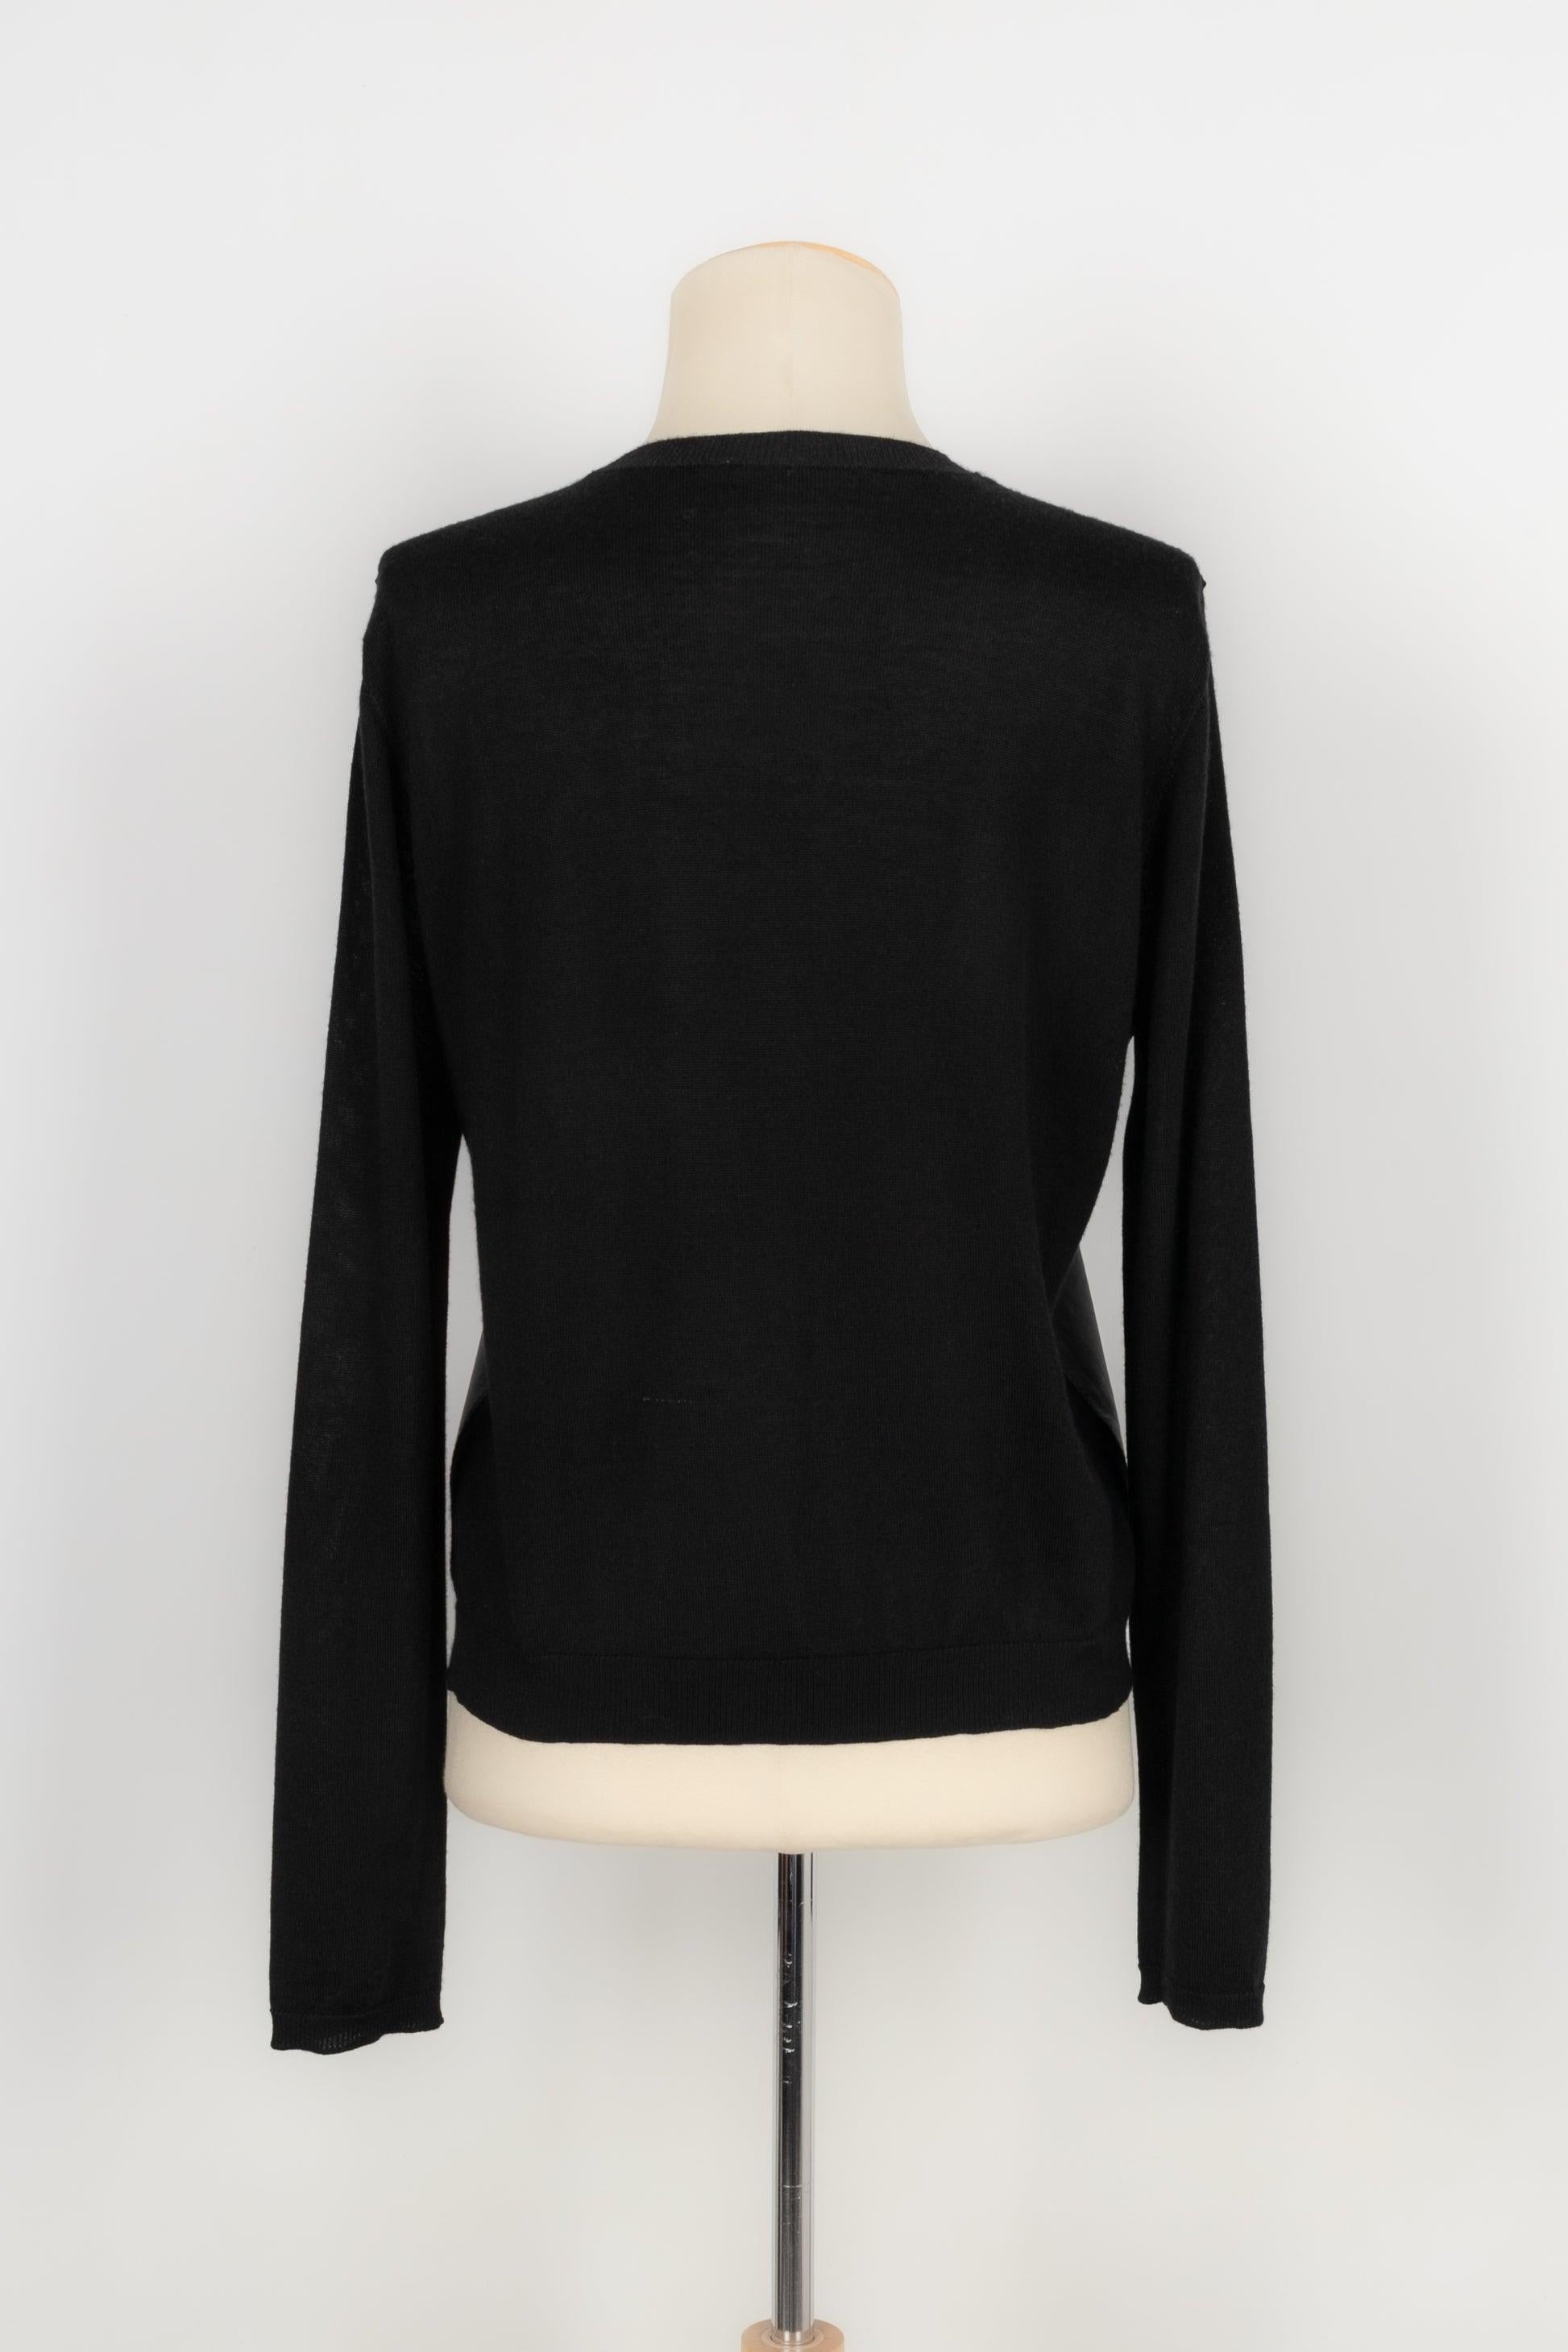 Women's Christian Dior Black Lambskin and Cashmere Long-Sleeved Top 42FR For Sale